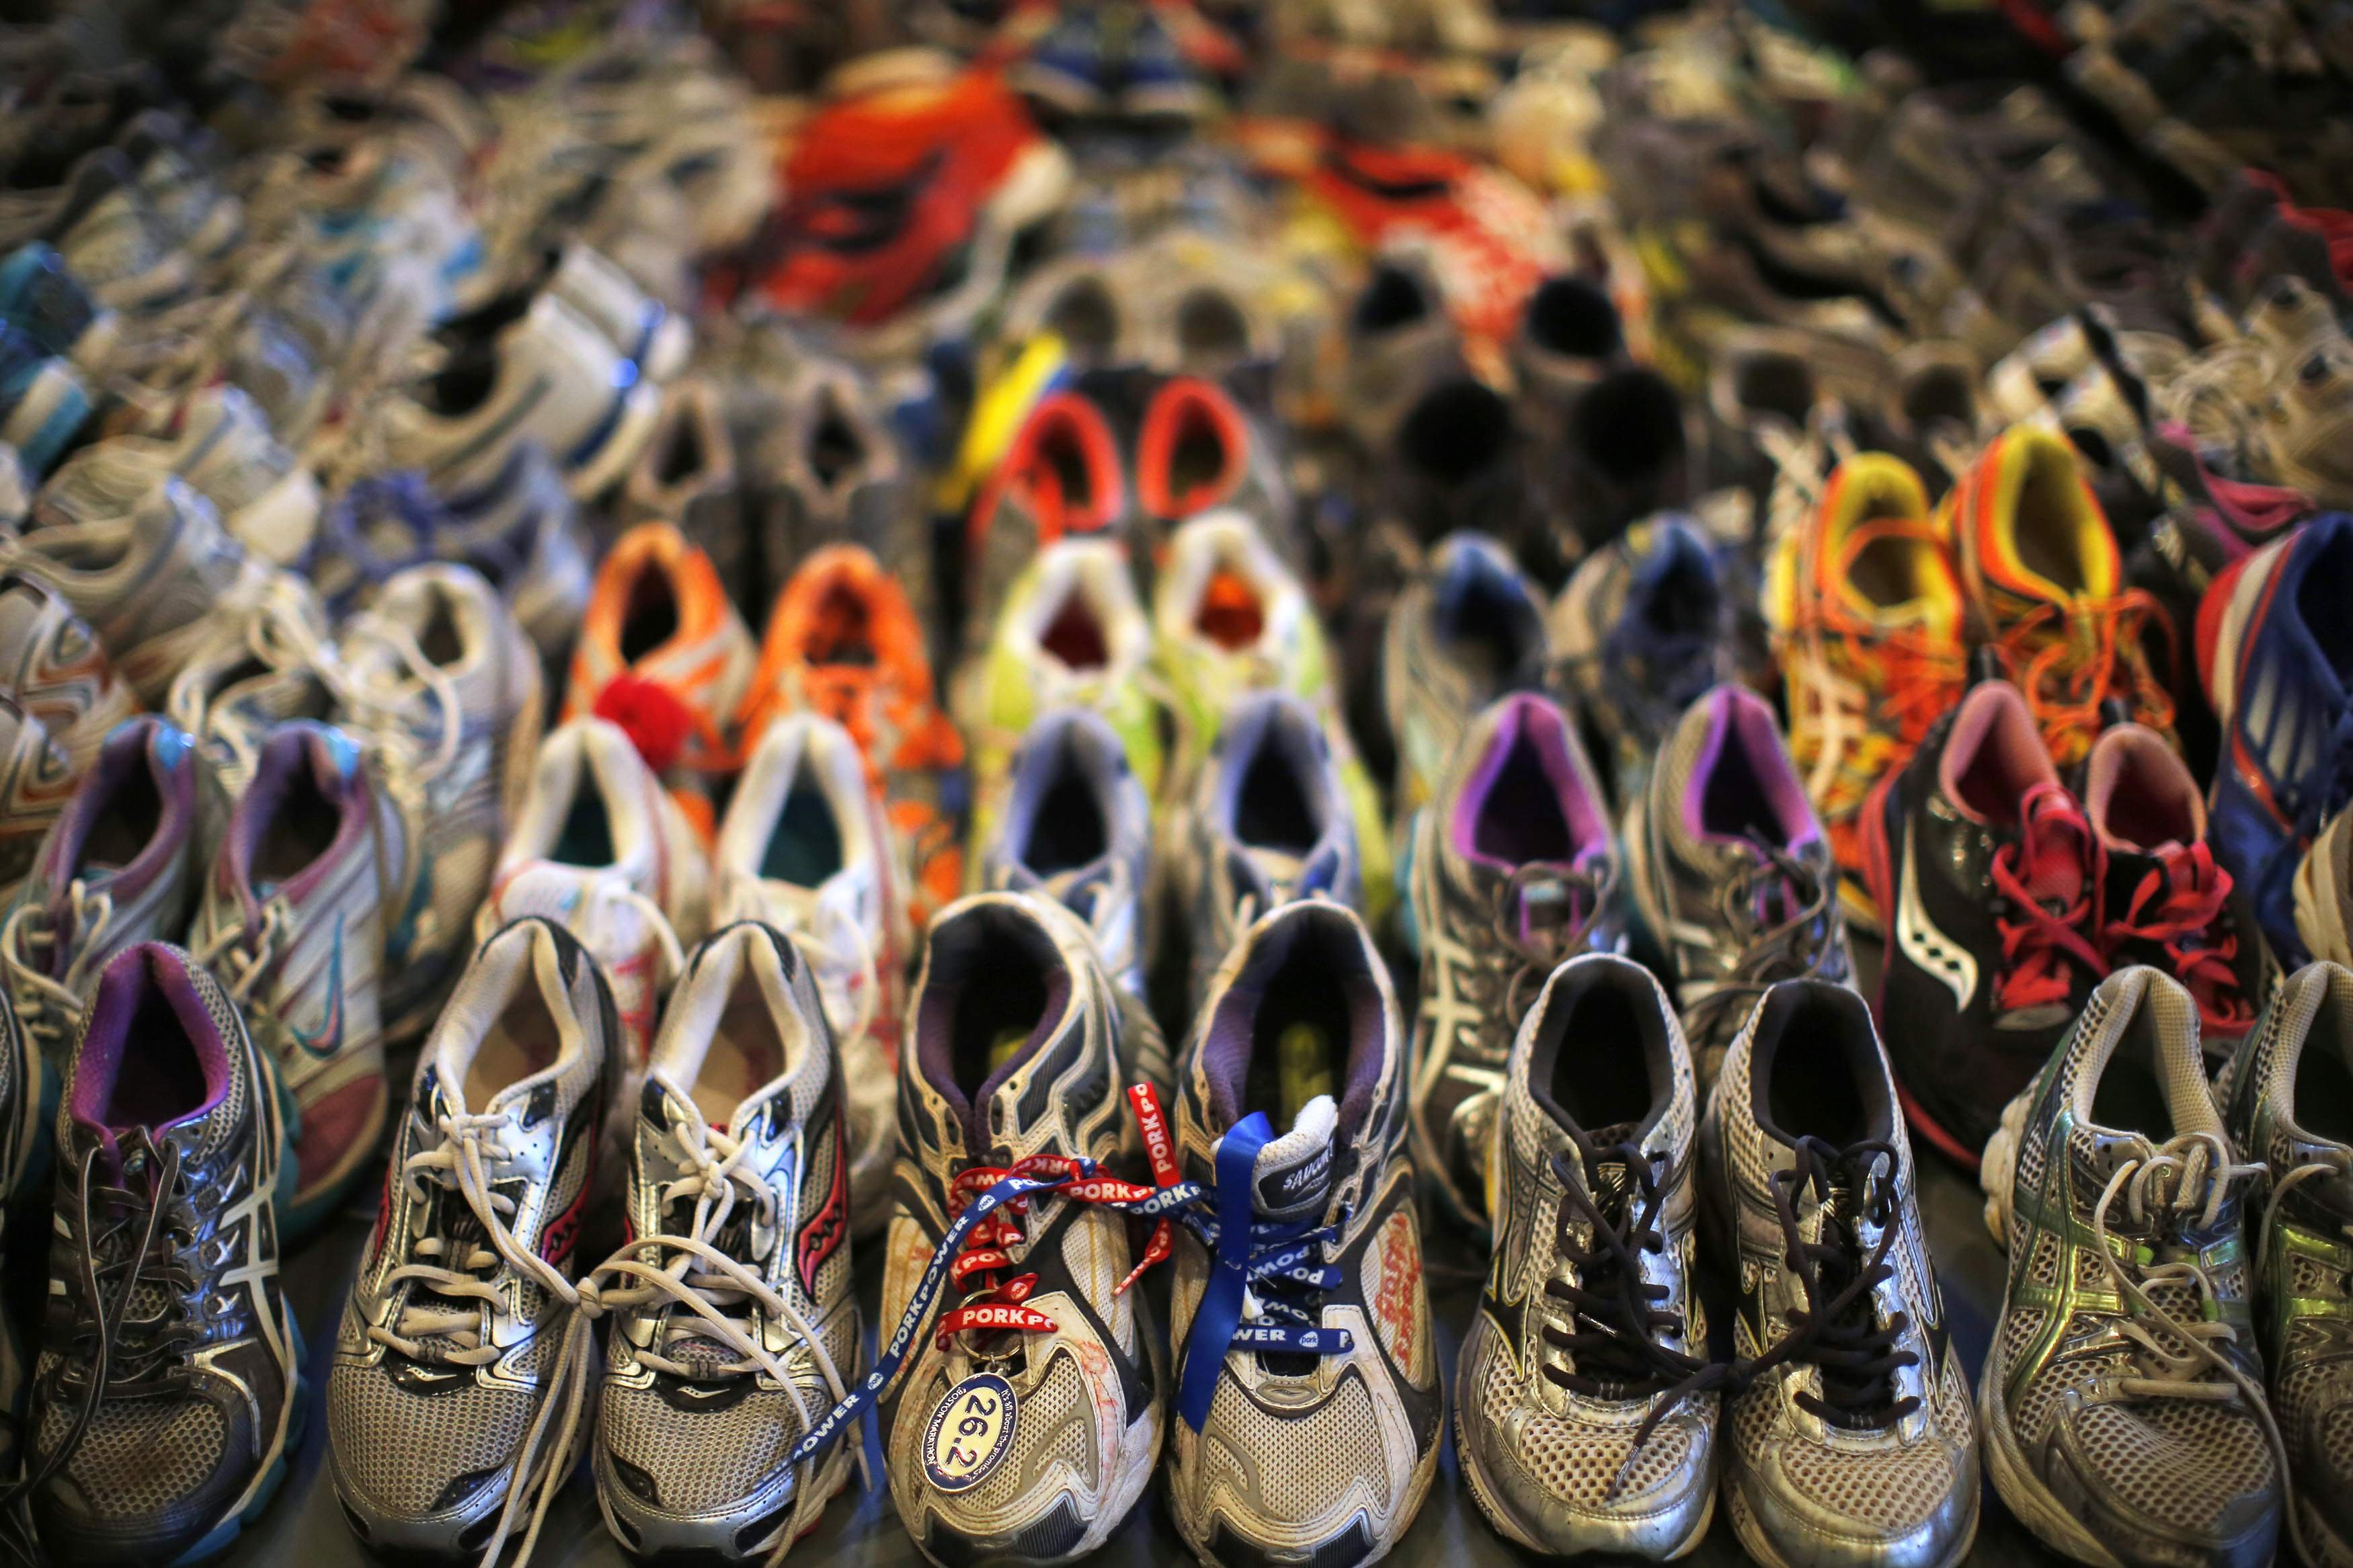 Apr. 16, 2014. Running shoes left at the makeshift memorial following the 2013 Boston Marathon bombings are displayed in an exhibit titled  Dear Boston: Messages from the Marathon Memorial  at the Boston Public Library in Boston, Massachusetts.